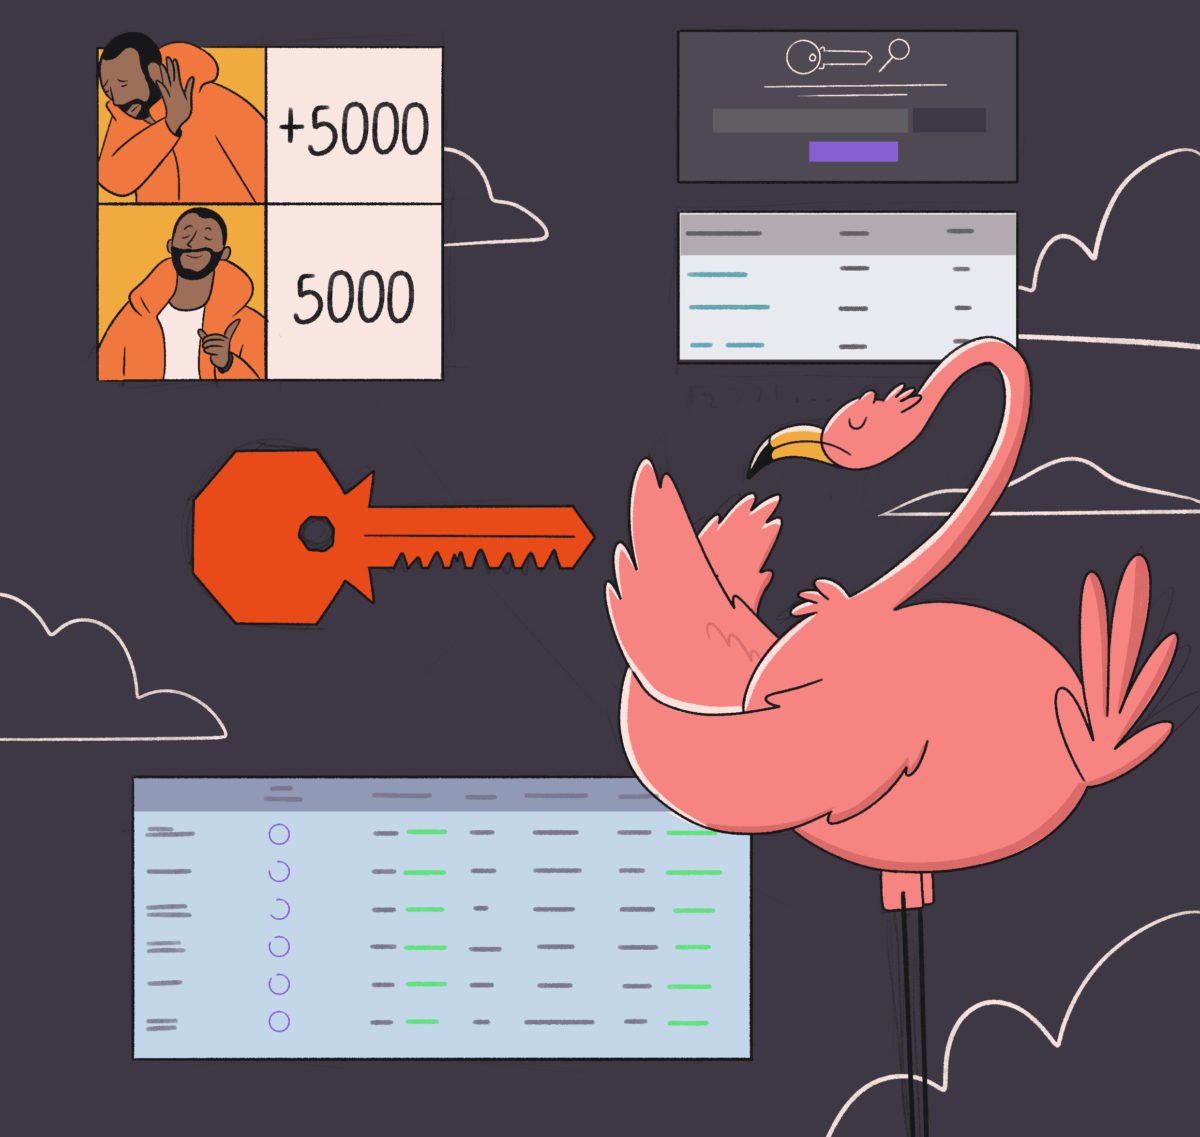 A stylized illustration featuring various elements: a person in two panels making hand gestures, a large key, a flamingo balancing on one leg, and abstract representations of digital interfaces and data.